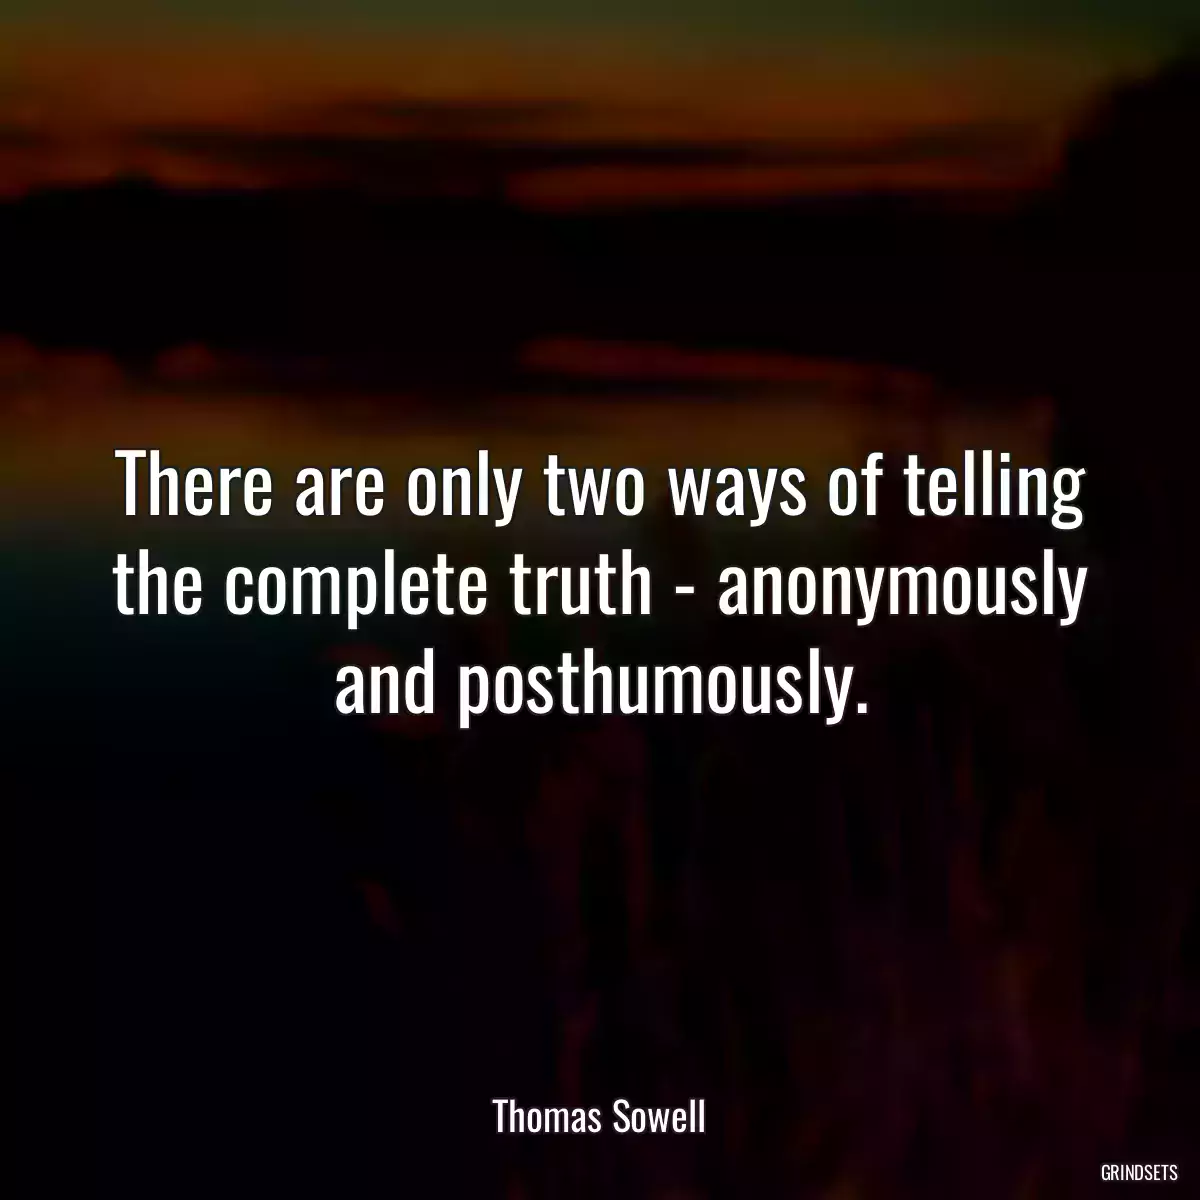 There are only two ways of telling the complete truth - anonymously and posthumously.